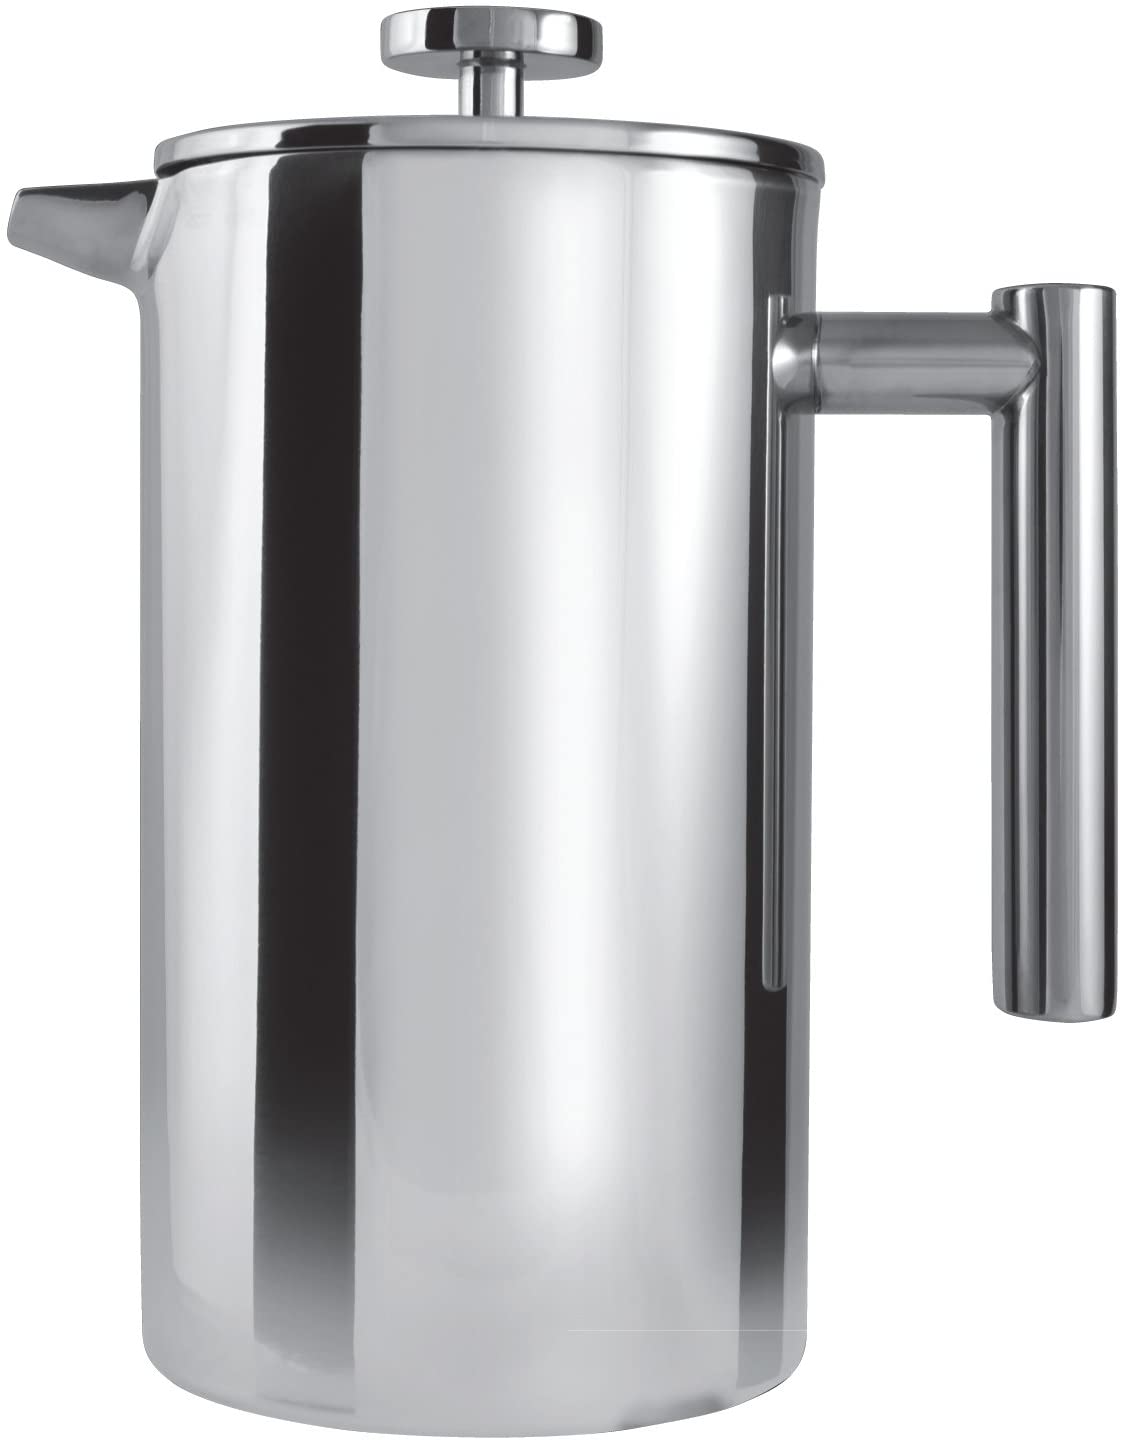 Grunwerg Café Olé Stainless Steel Coffee Maker 1 Litre | Double-Walled Insulation with Cool-Touch Handles | French Press with Stainless Steel Filter | Lockable Spout | Dishwasher Safe | High Gloss Polished